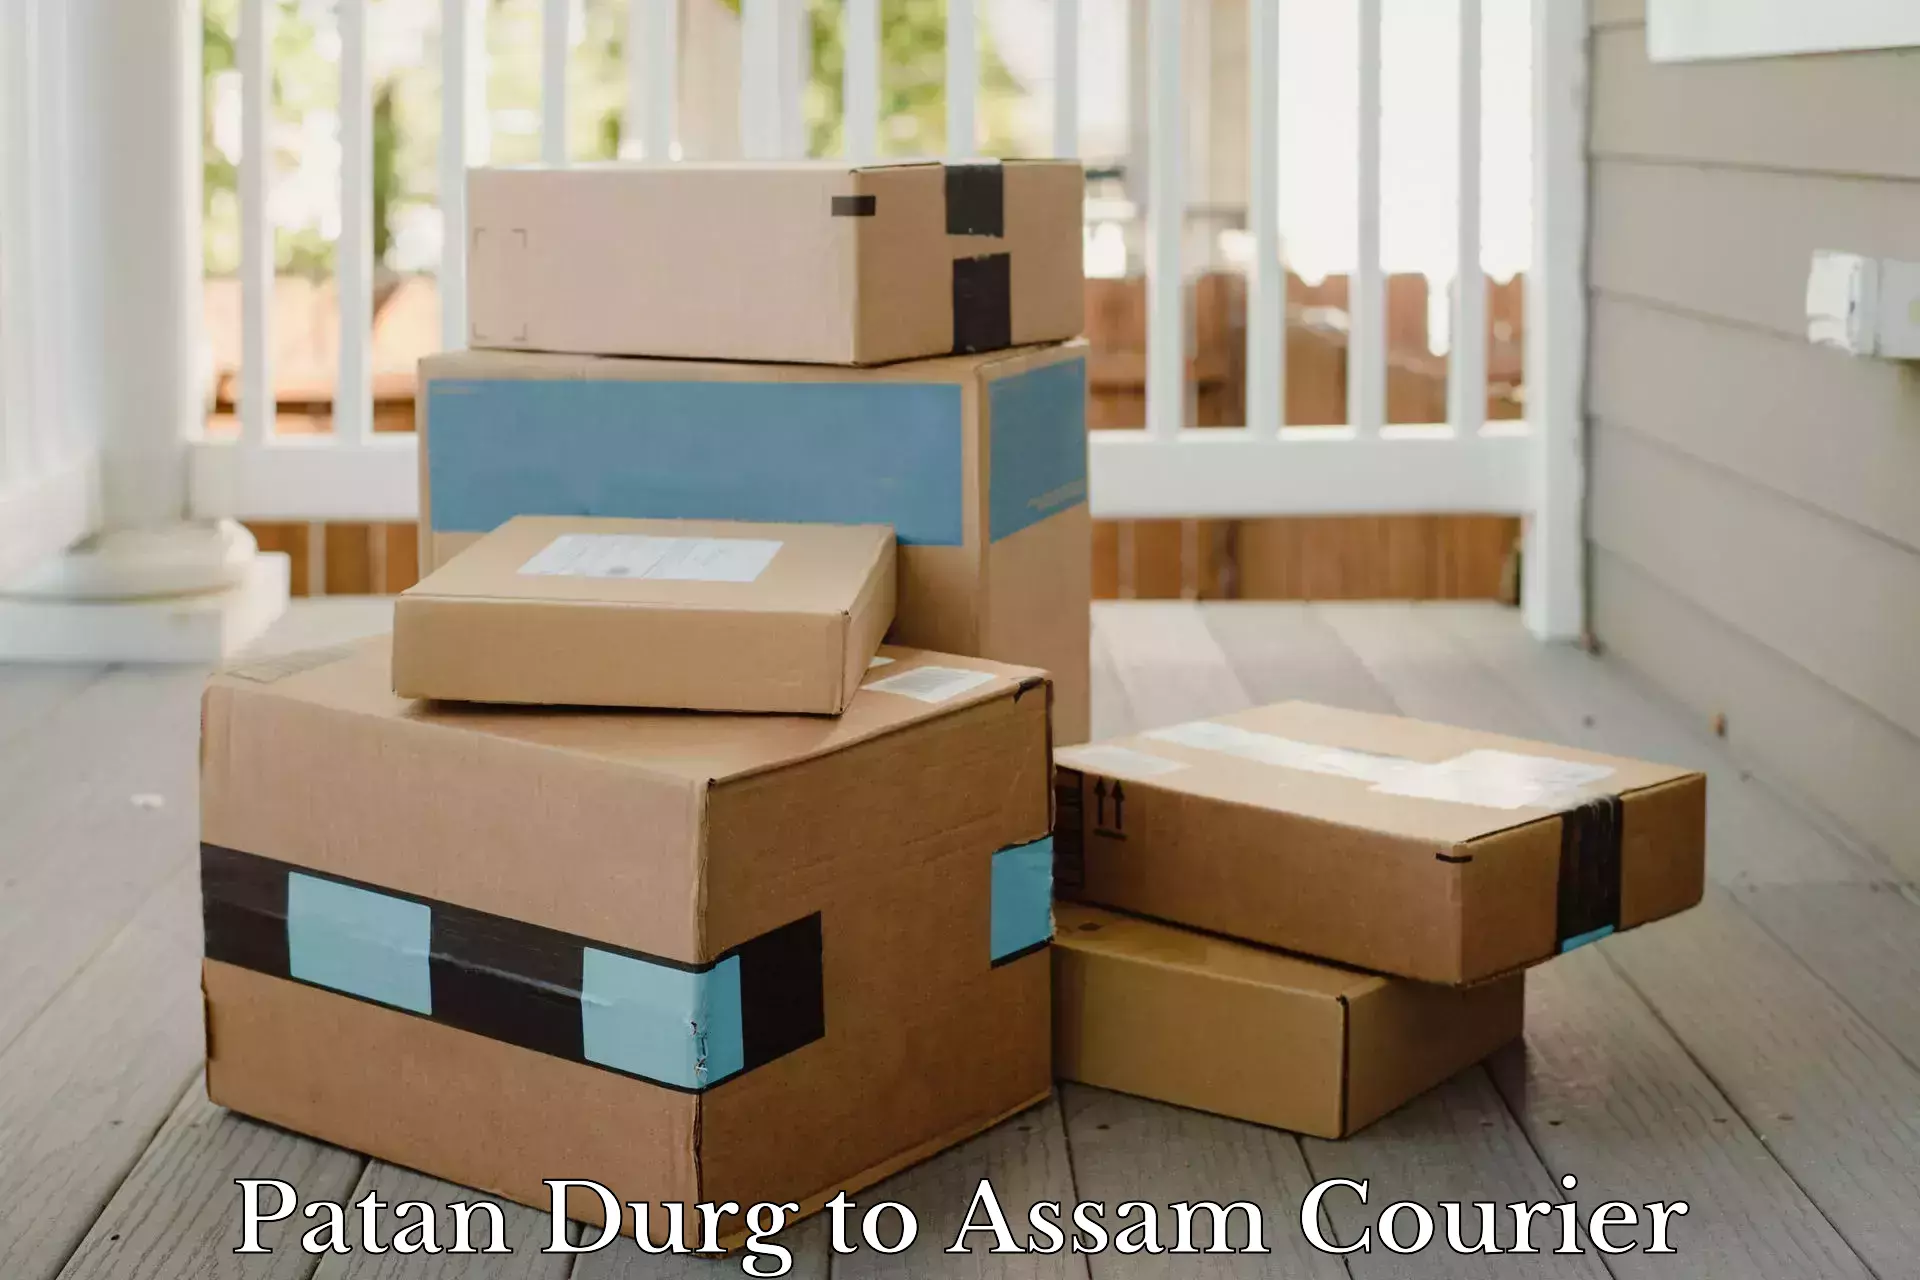 Reliable courier service Patan Durg to Hojai